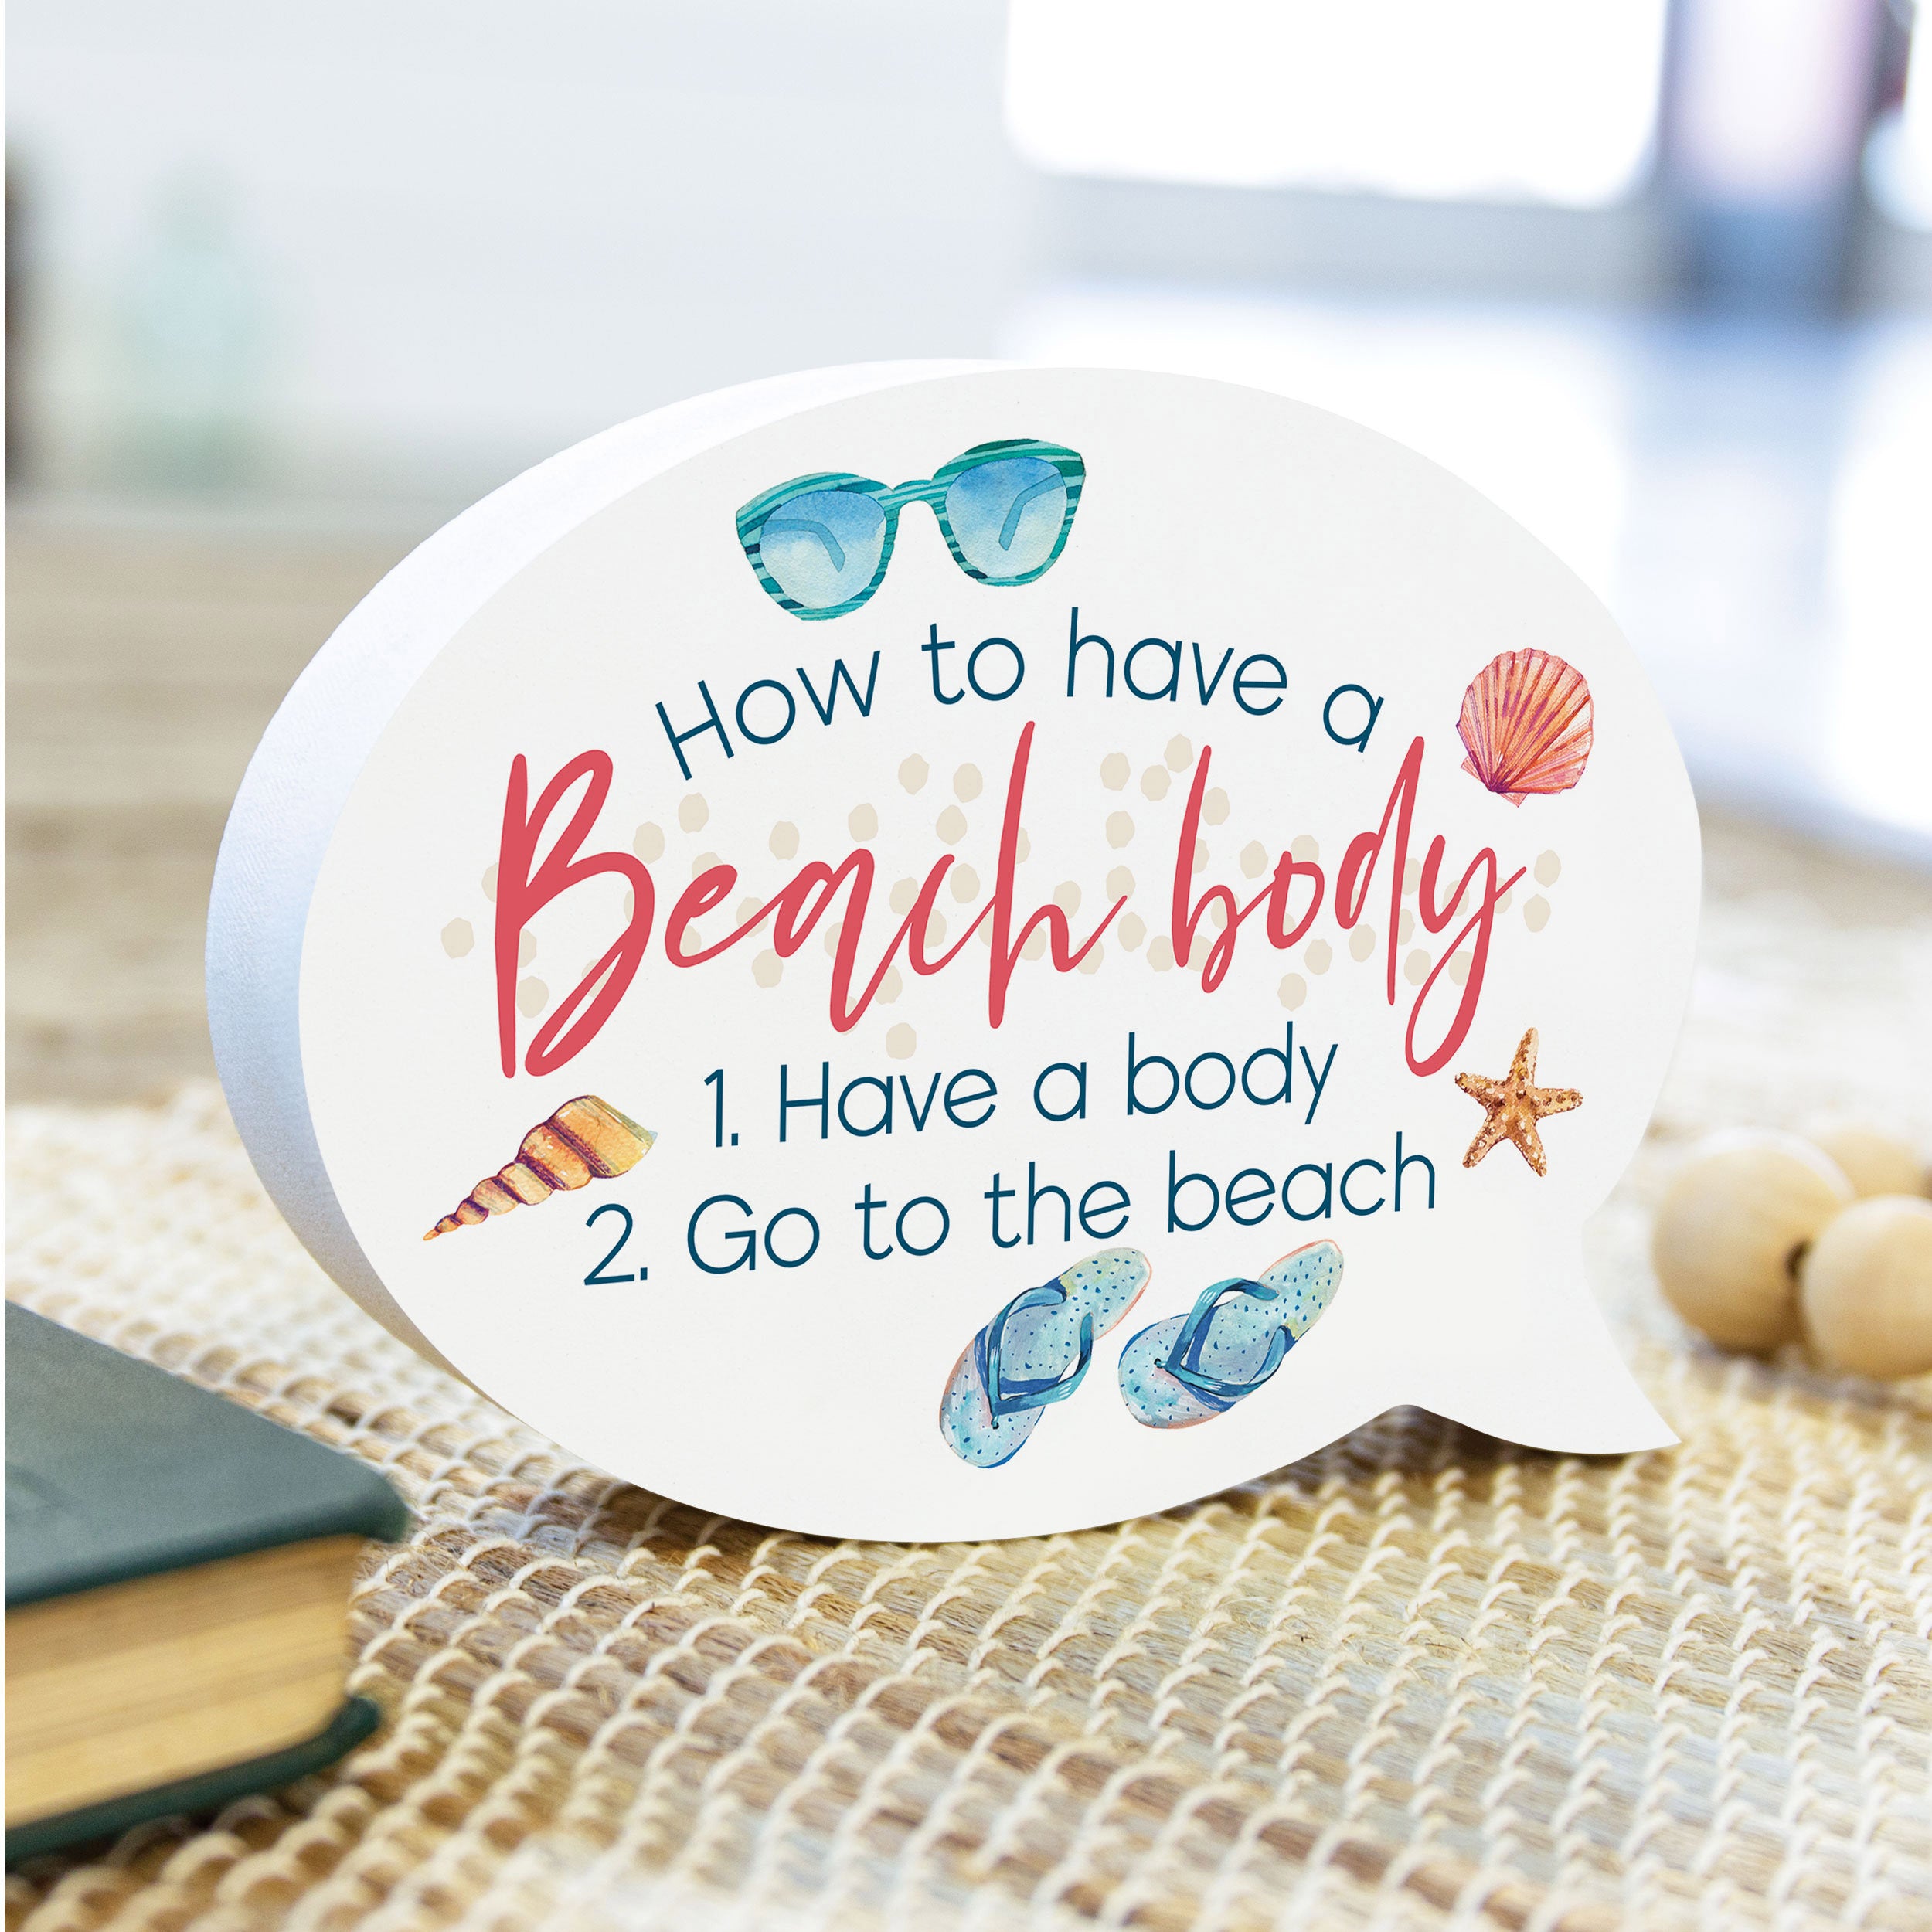 How To Have A Beach Body 1. Have A Body 2. Go To The Beach Word Bubble